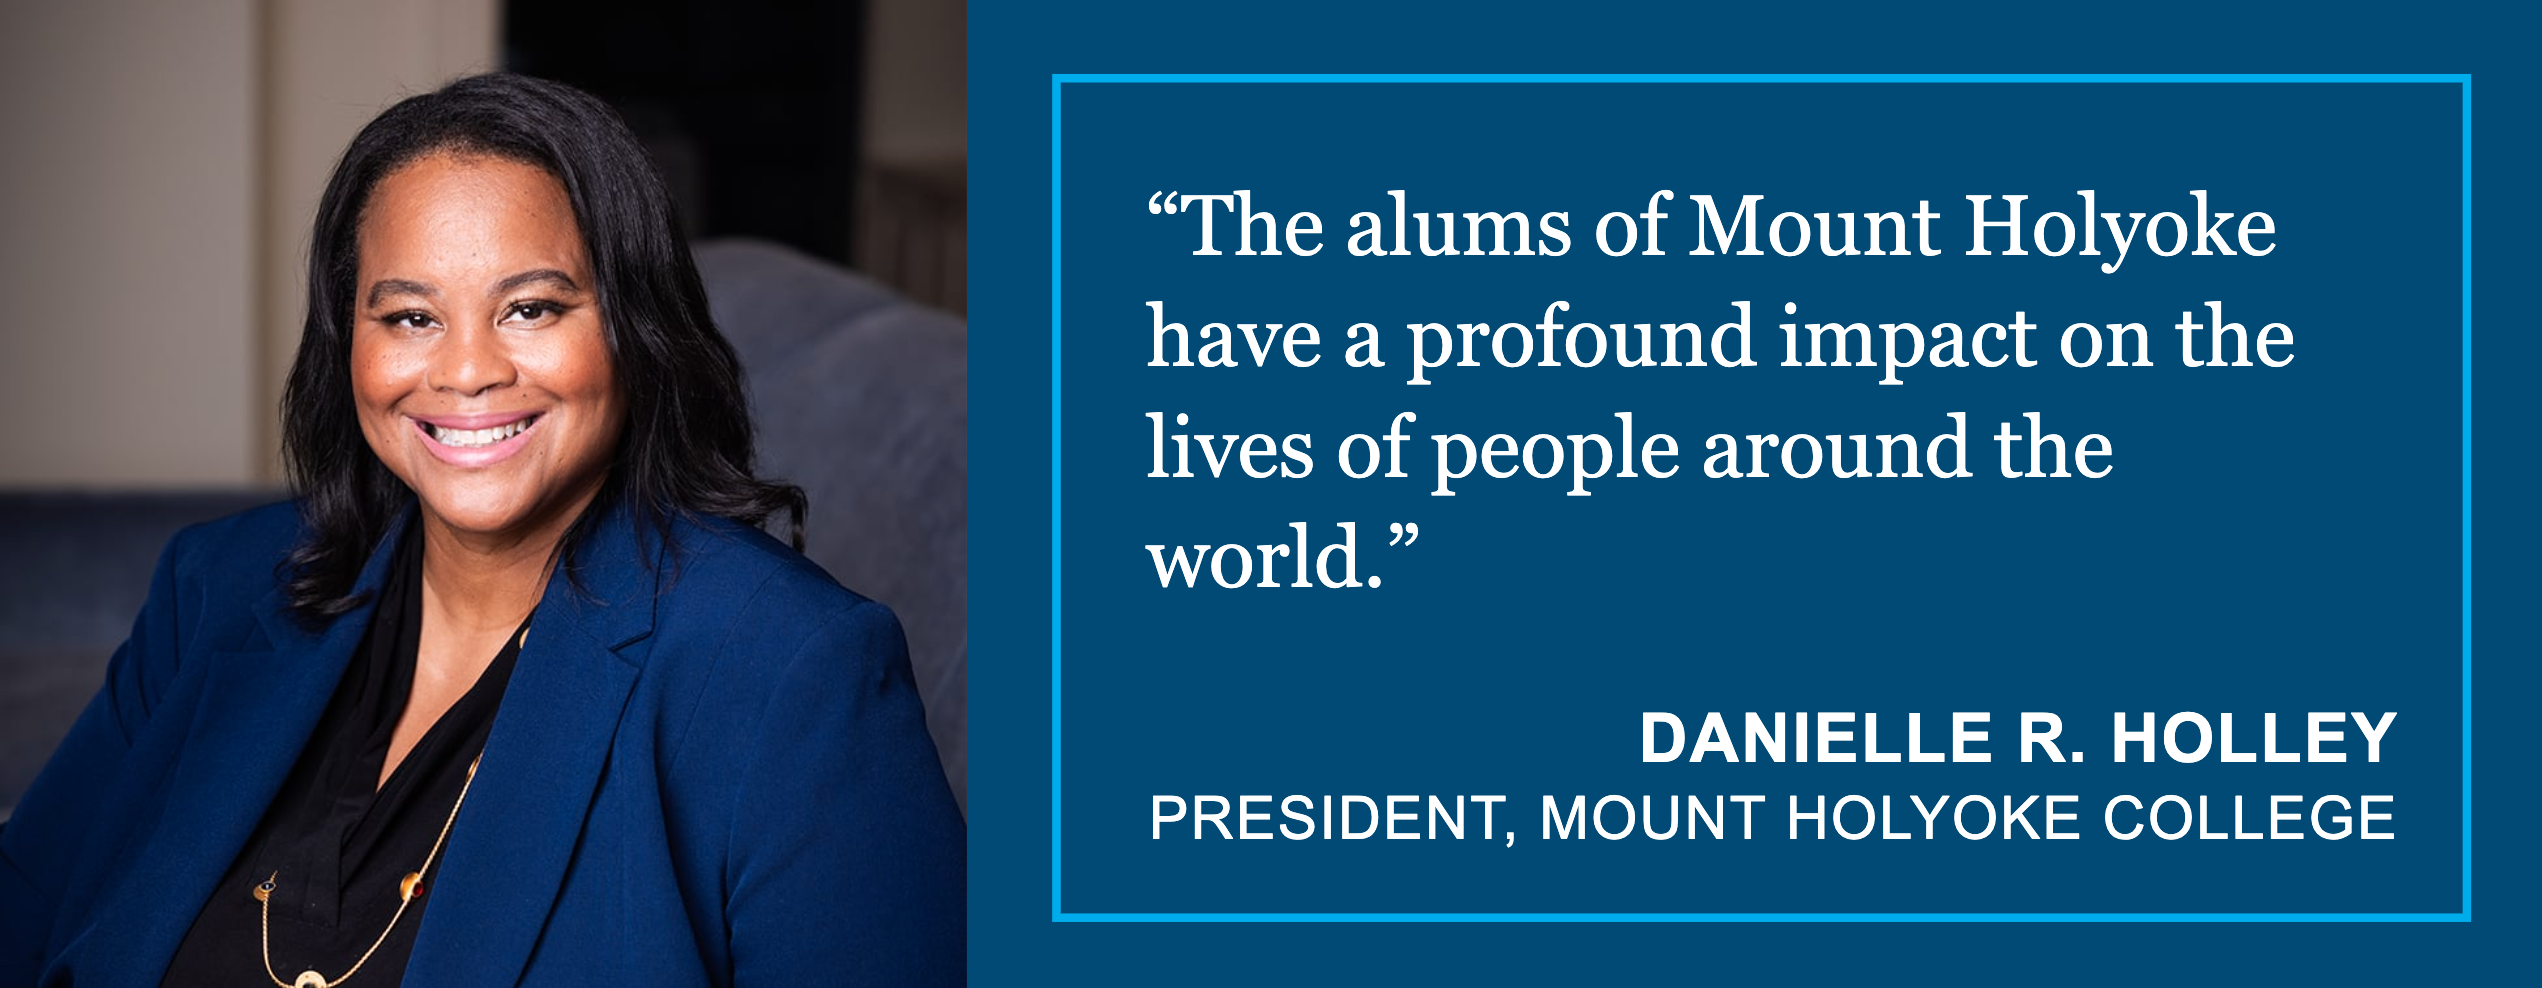 Photo of MHC President Danielle R Holley on left.  Quote on right in white text on dark blue background: "The alums of Mount Holyoke have a profound impact on the lives of people around the world."